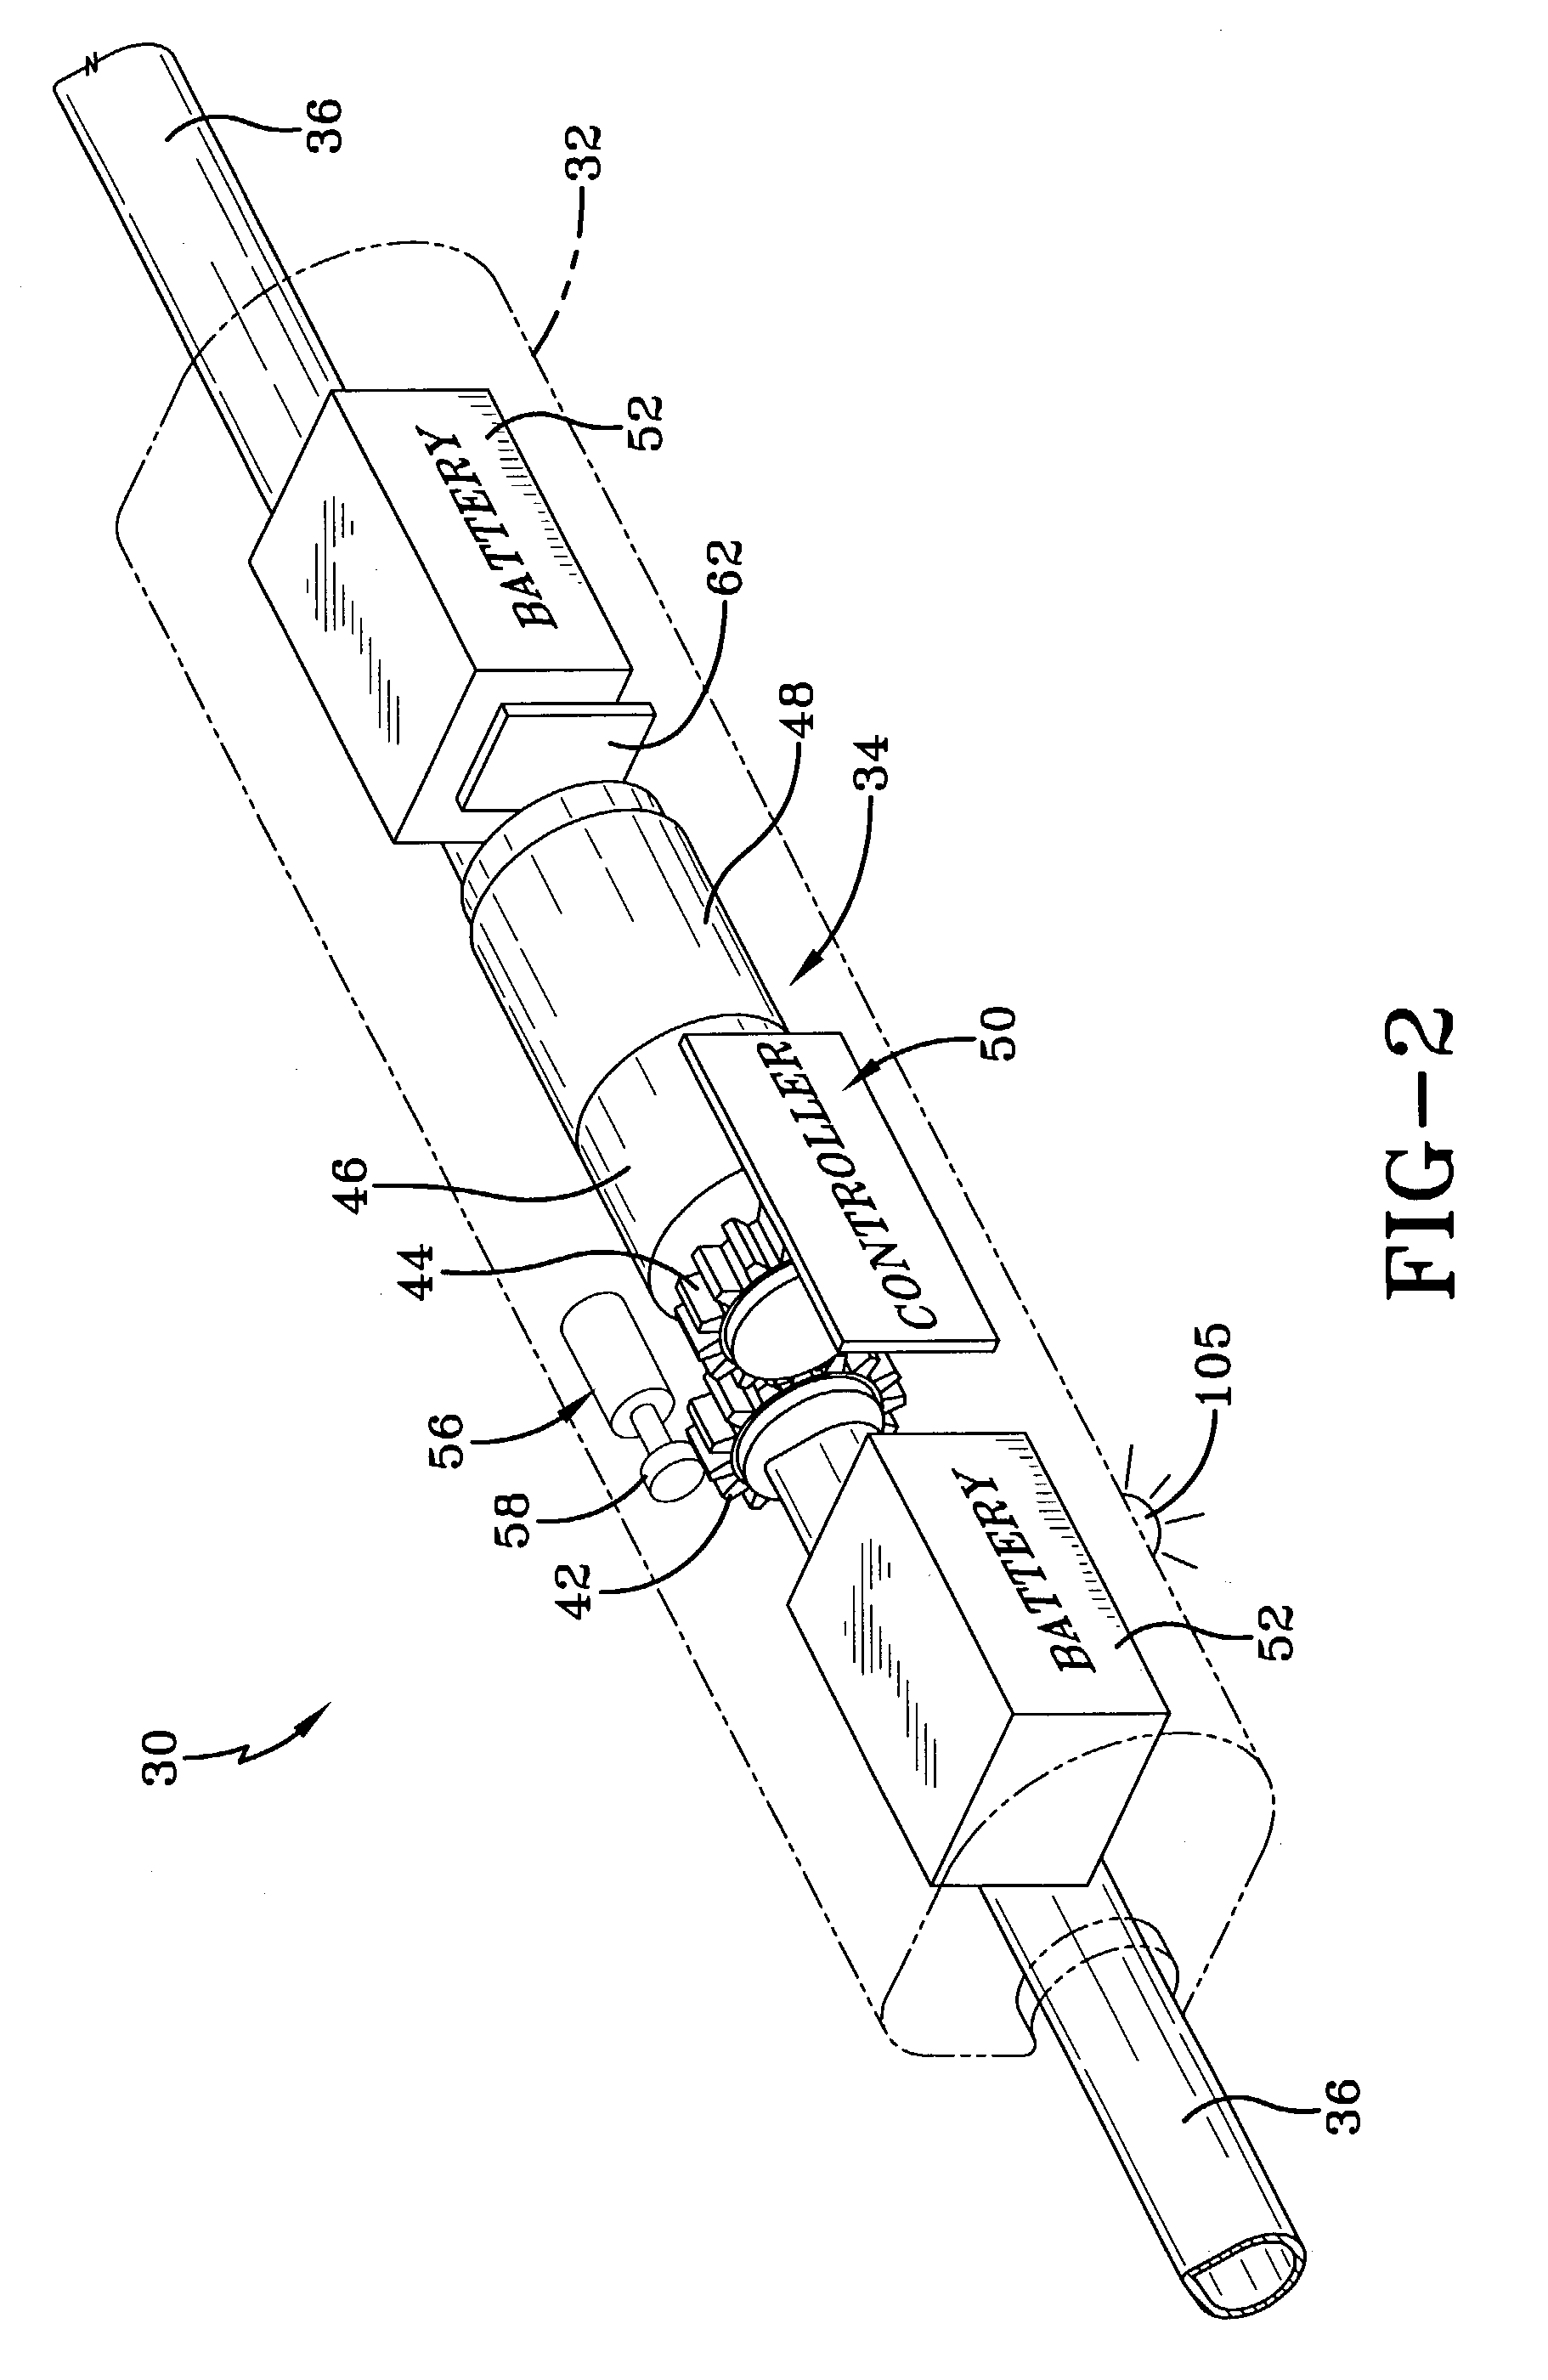 System and related methods for signaling the position of a movable barrier and securing its position